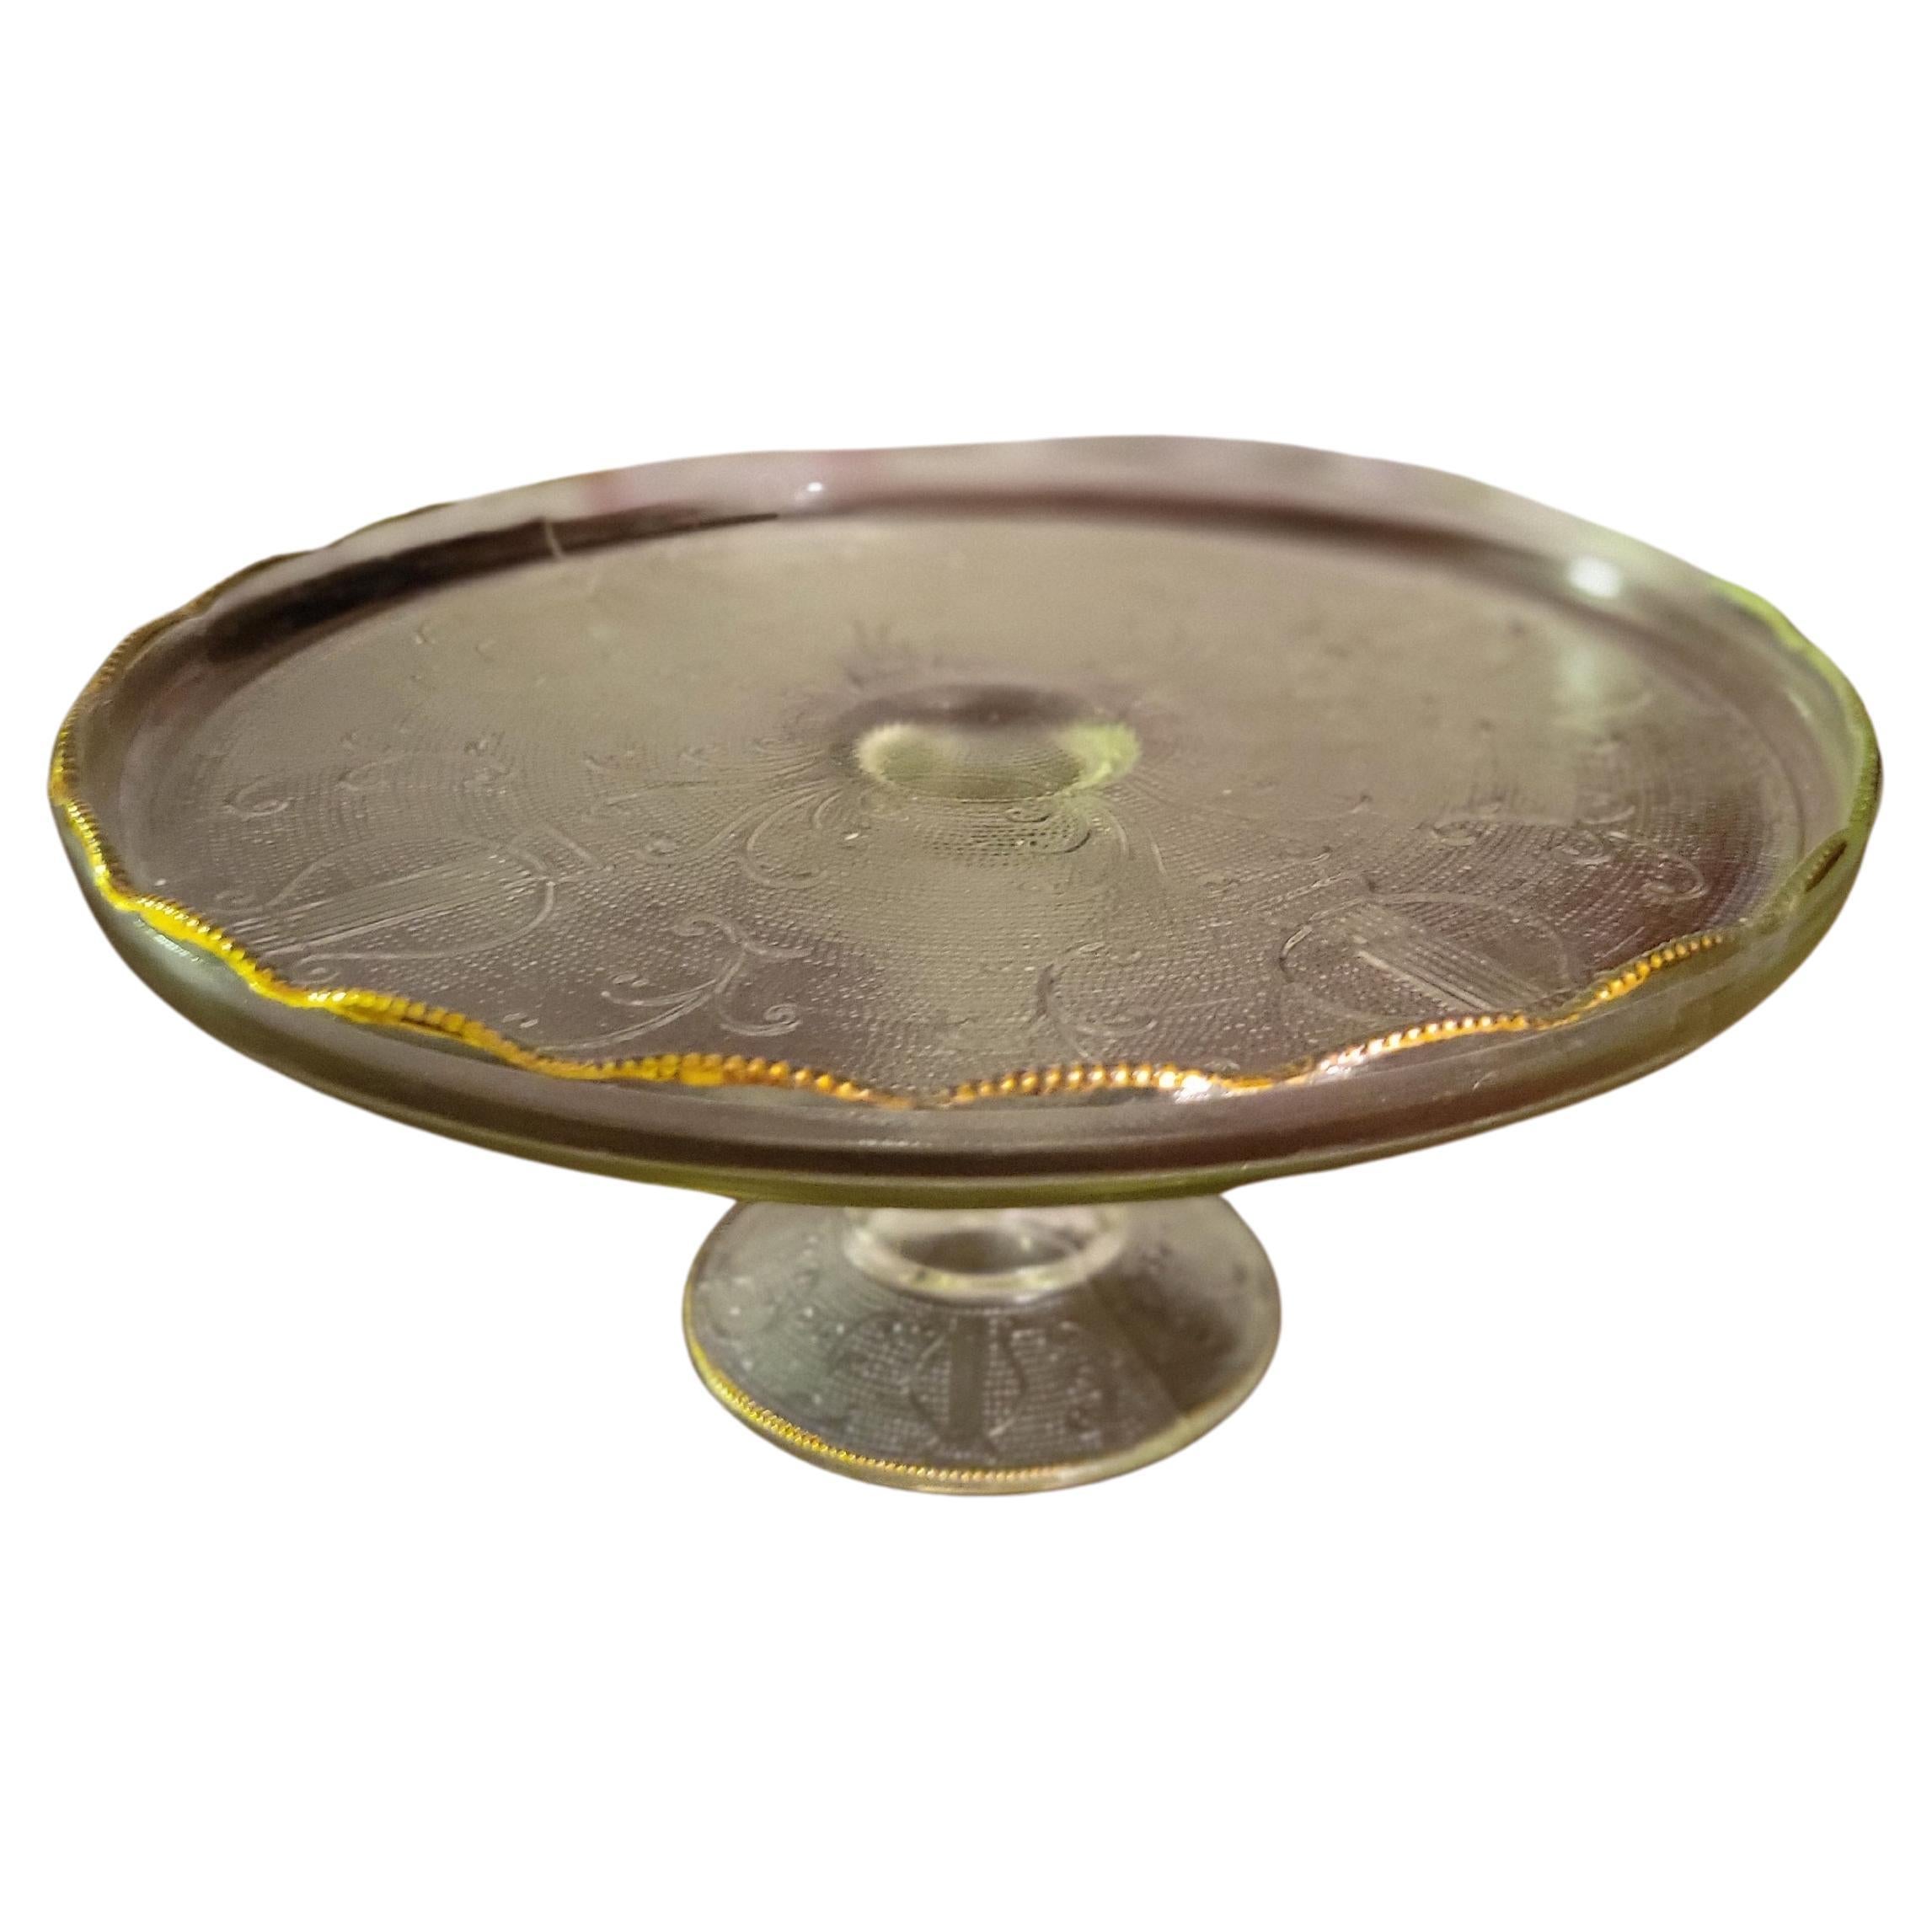 Jeannette 'Harp' Depression Glass Cake Stand with Gold Scalopped Trim 